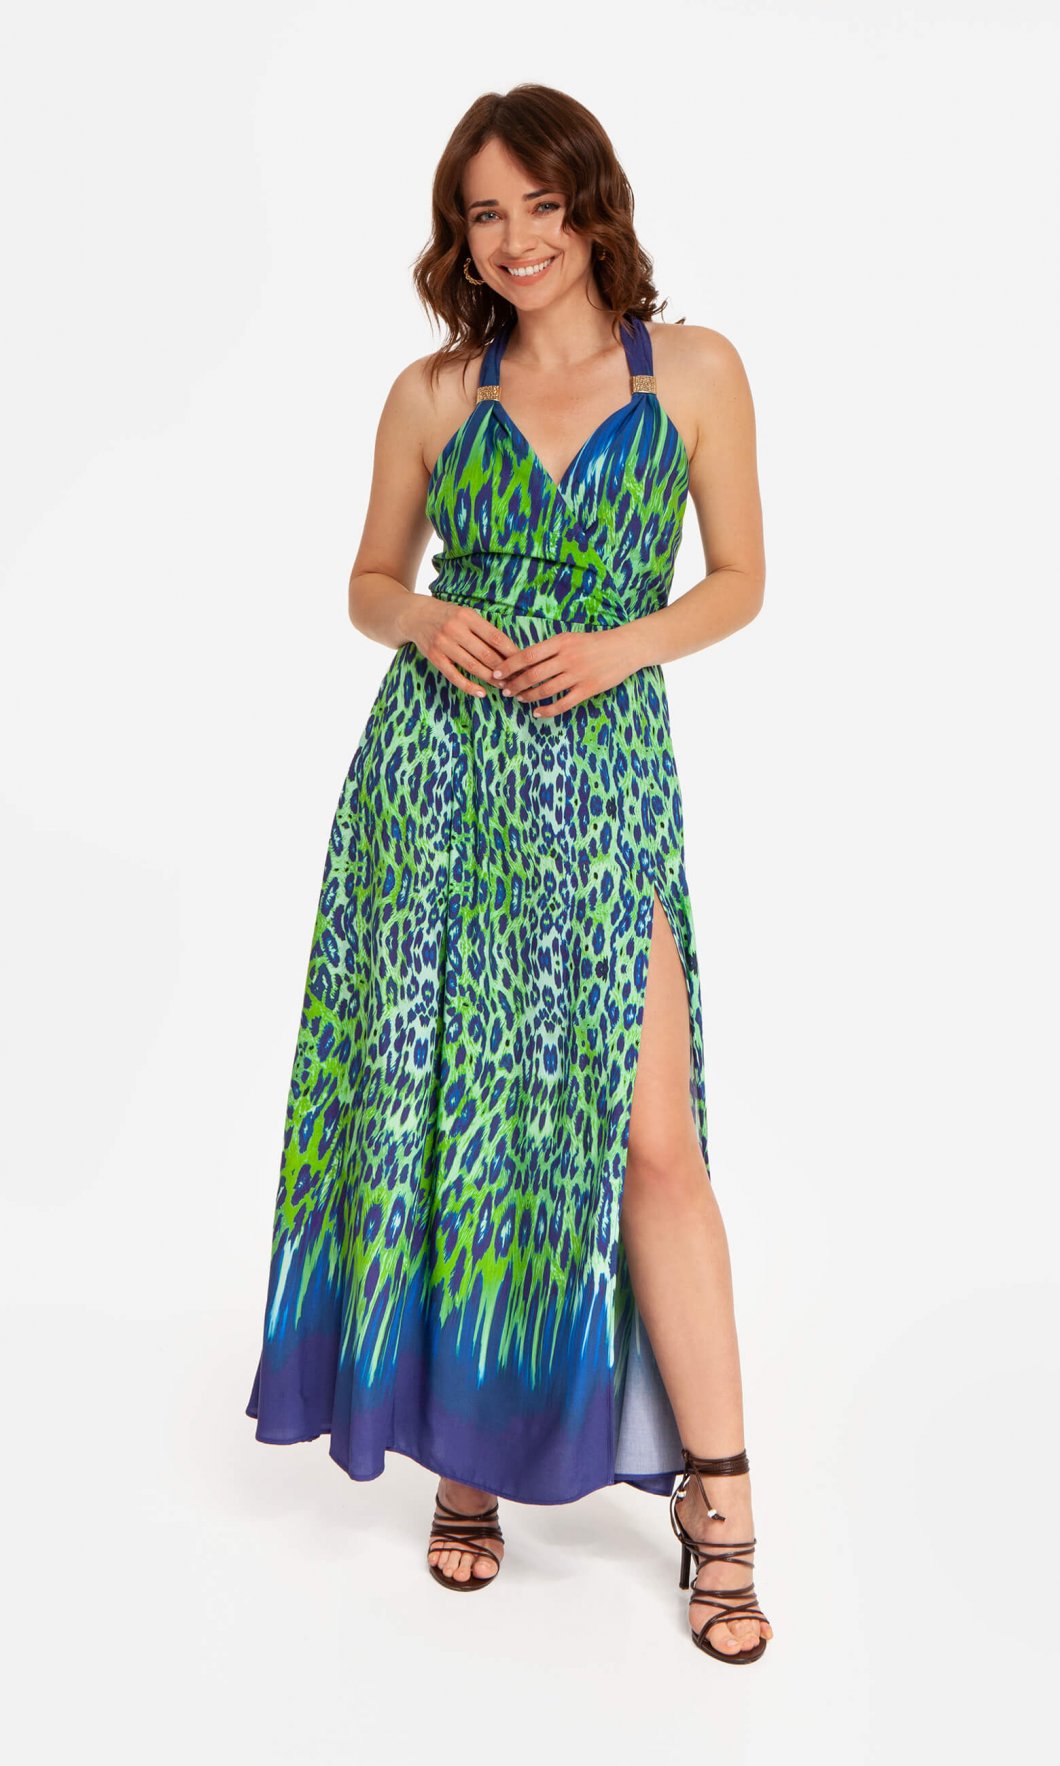 ANGEL dress - green and blue